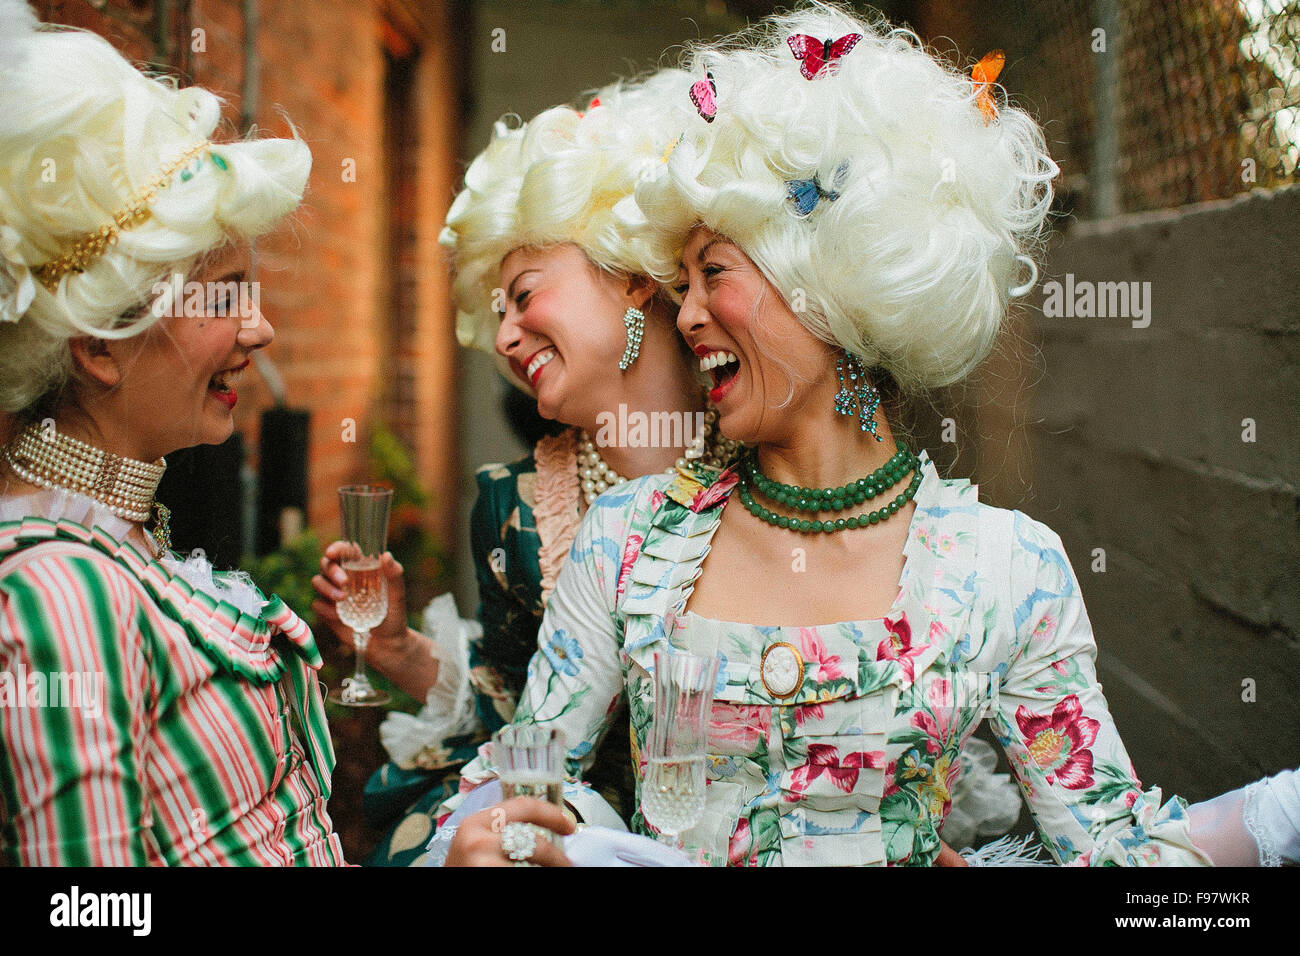 women-laughing-during-victorian-themed-dinner-F97WKR.jpg